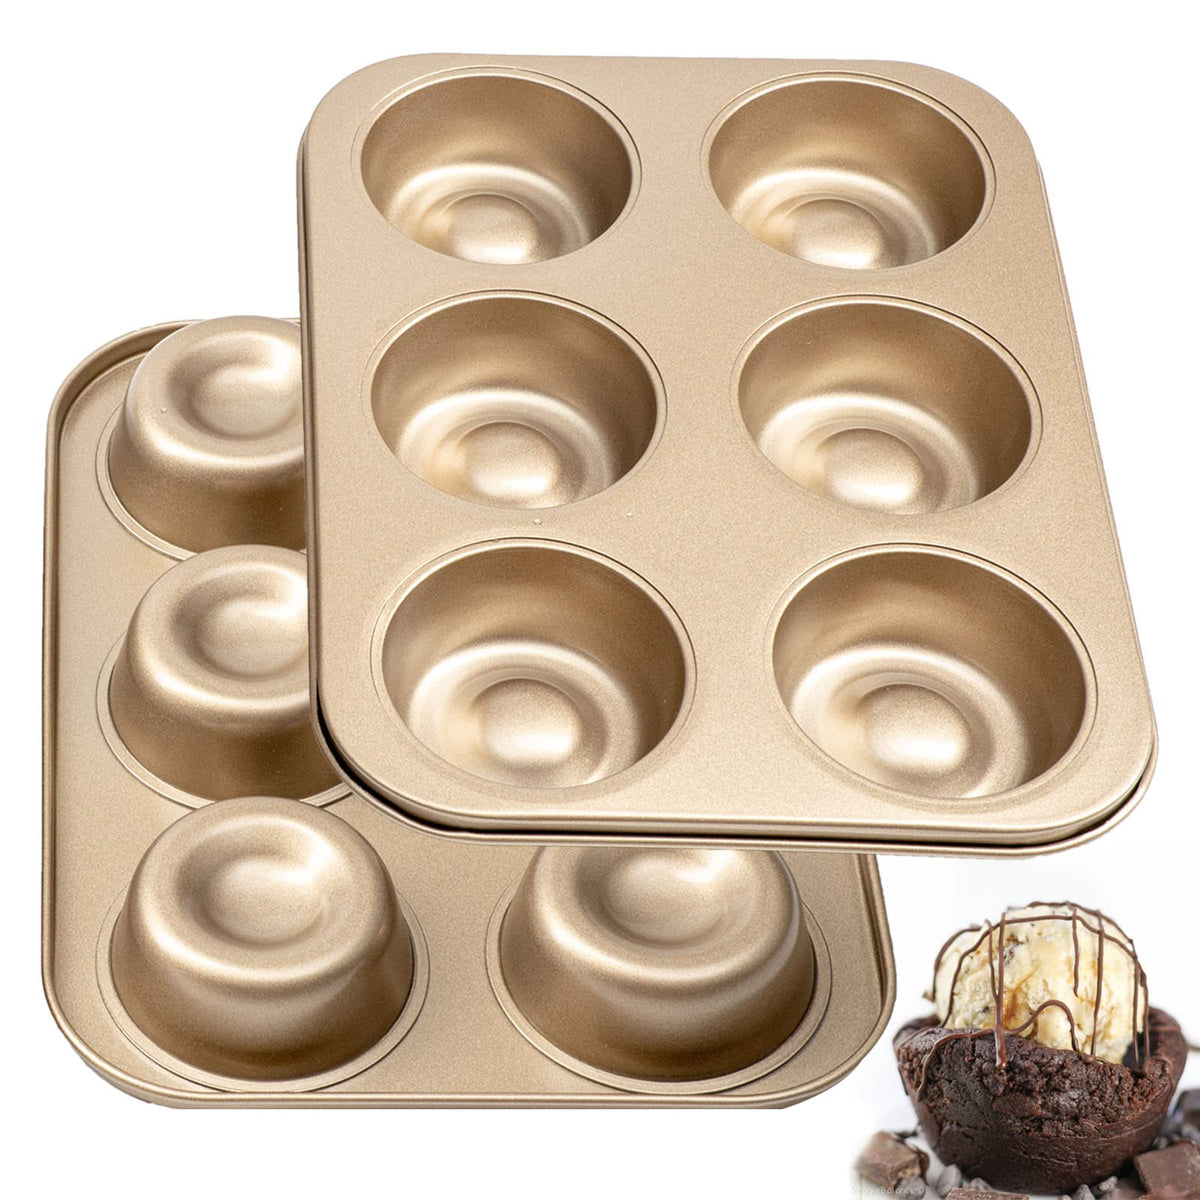  Mini Bndt Cake Pan, Nonstick Brownie Bowl Pan 12-Cavity Fluted  Small Round Cake Tray Shortcake Pan Mold for Fall Baking Thanksgiving  Muffin Bavarois, Carbon Steel Cake Pan: Home & Kitchen